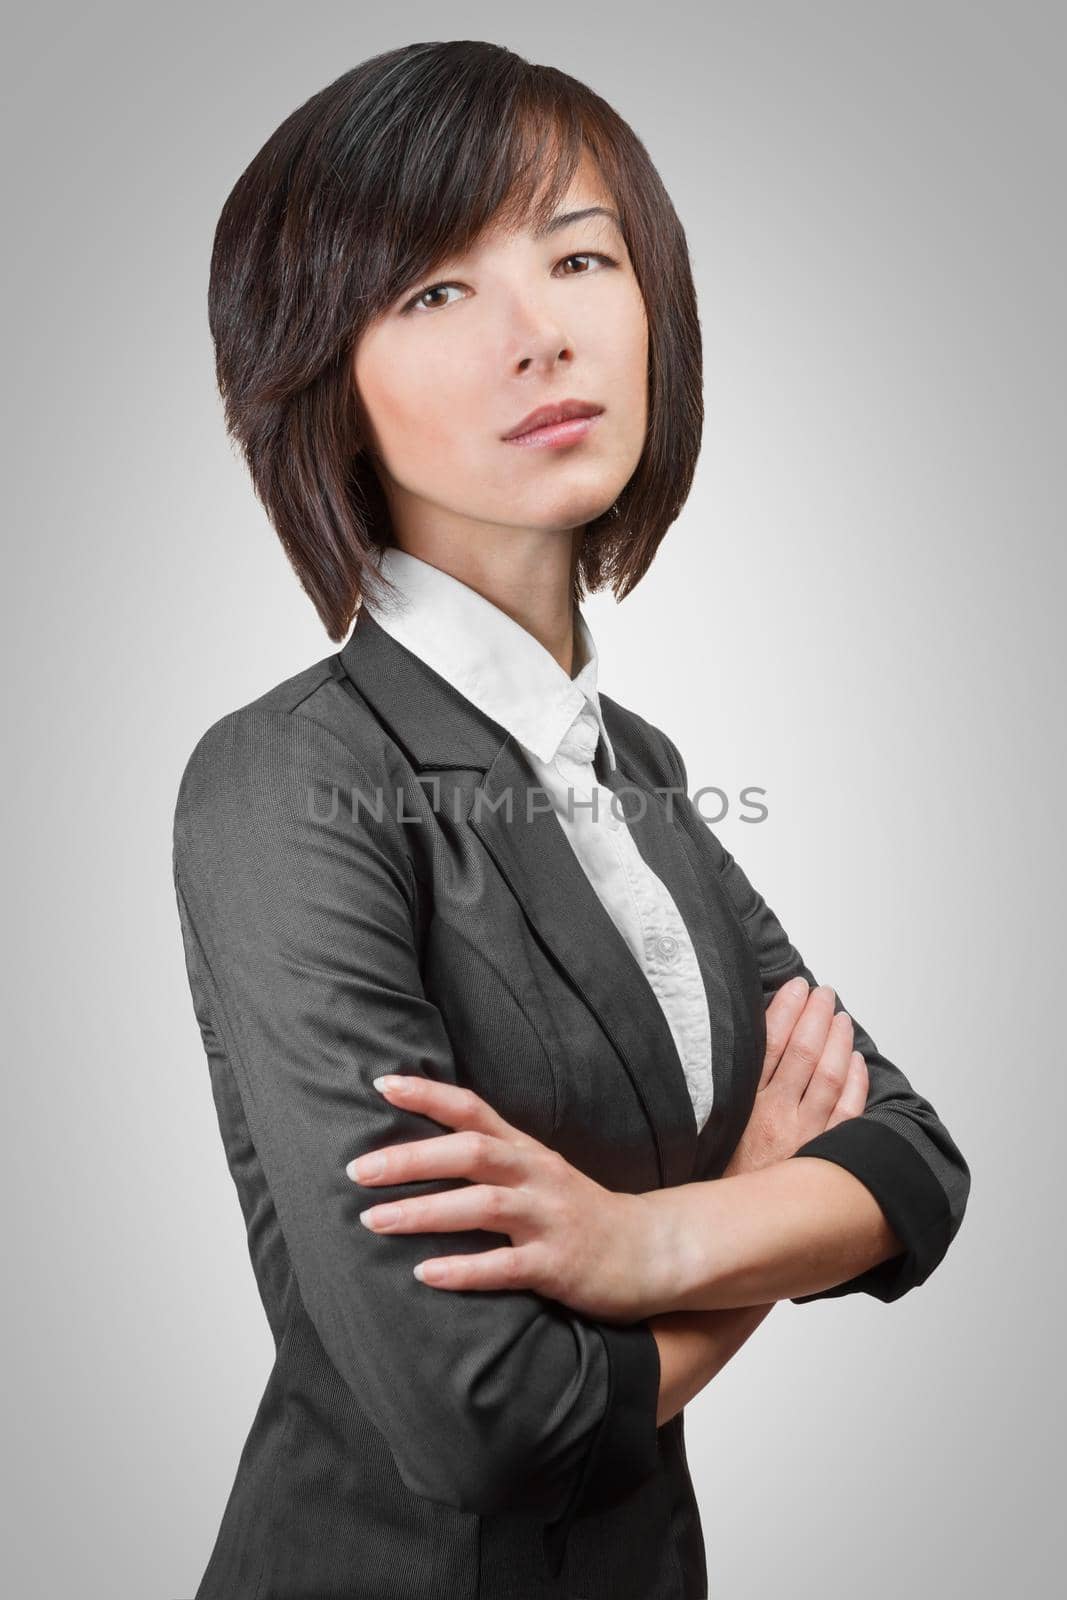 Portrait of a young businesswoman in a gray suit